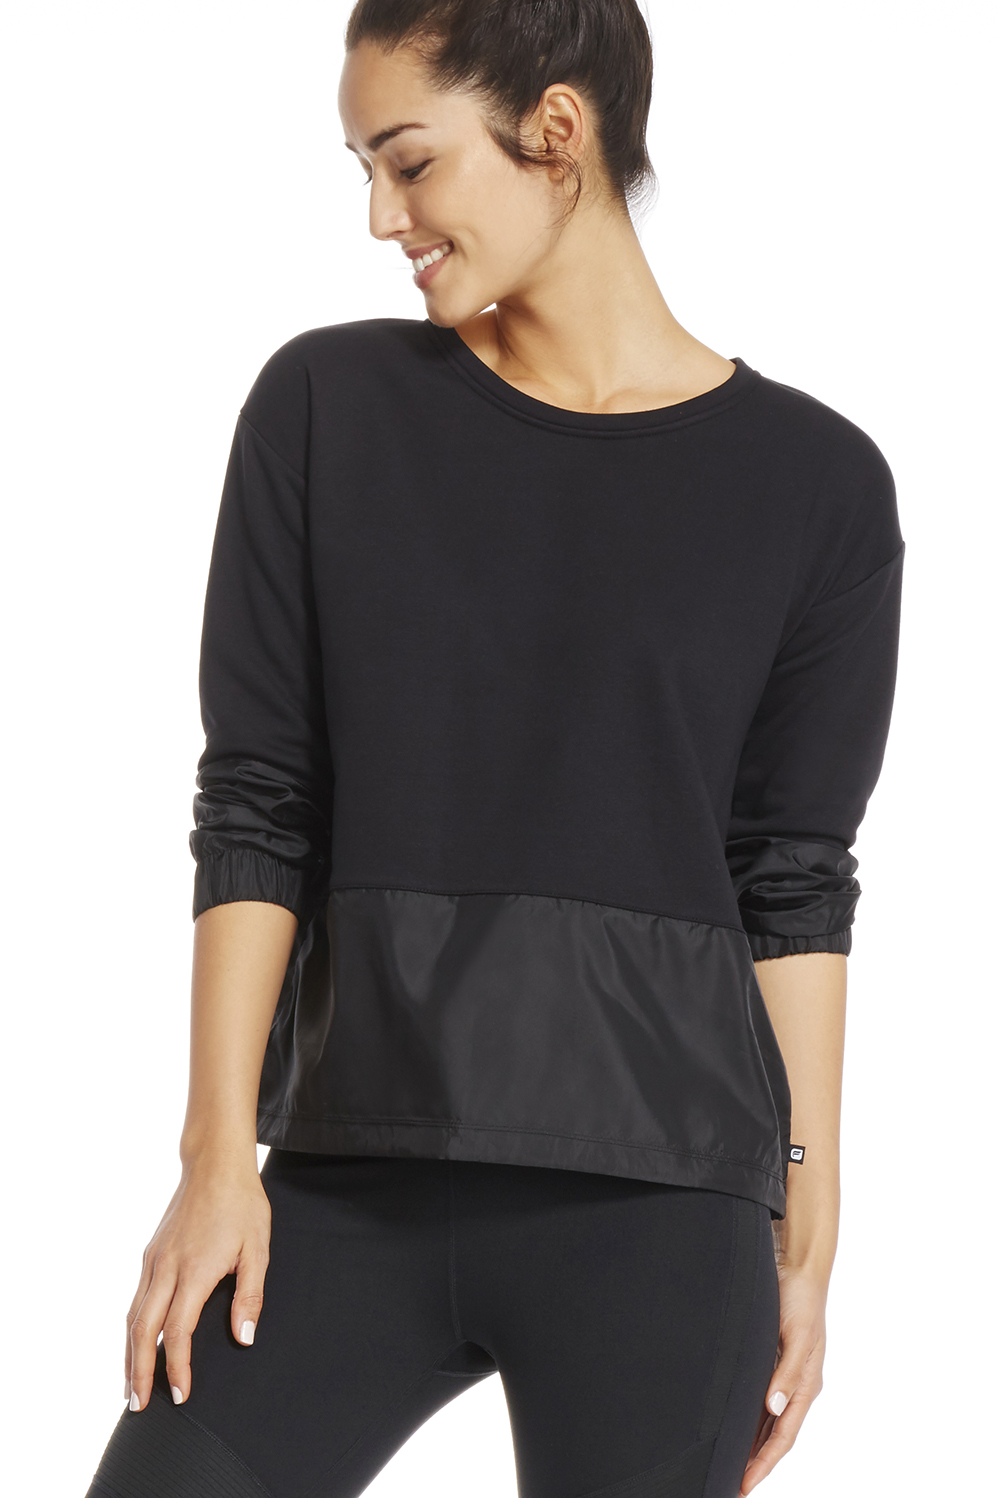 Windhaven Pullover - Fabletics